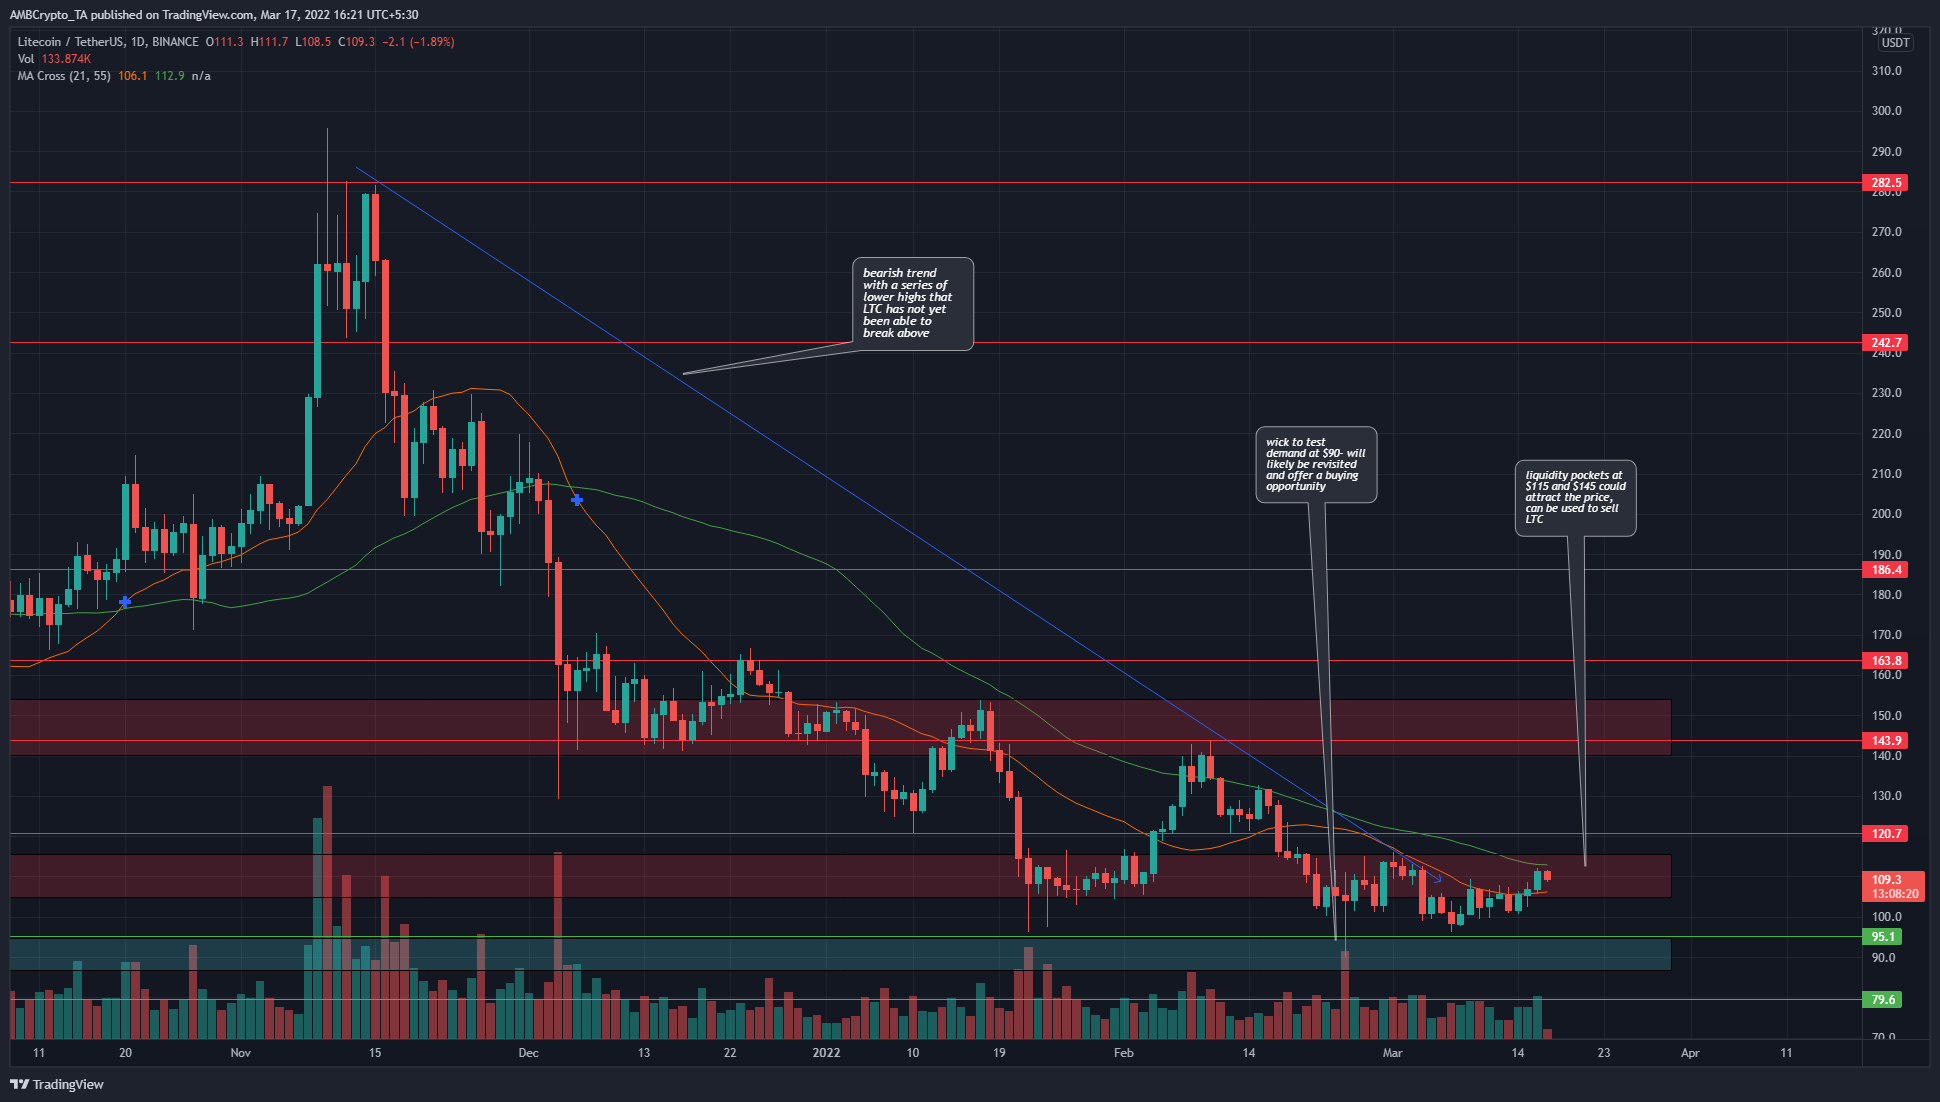 Litecoin- continued slide southward, or a range formation? In either case, look to sell in this area